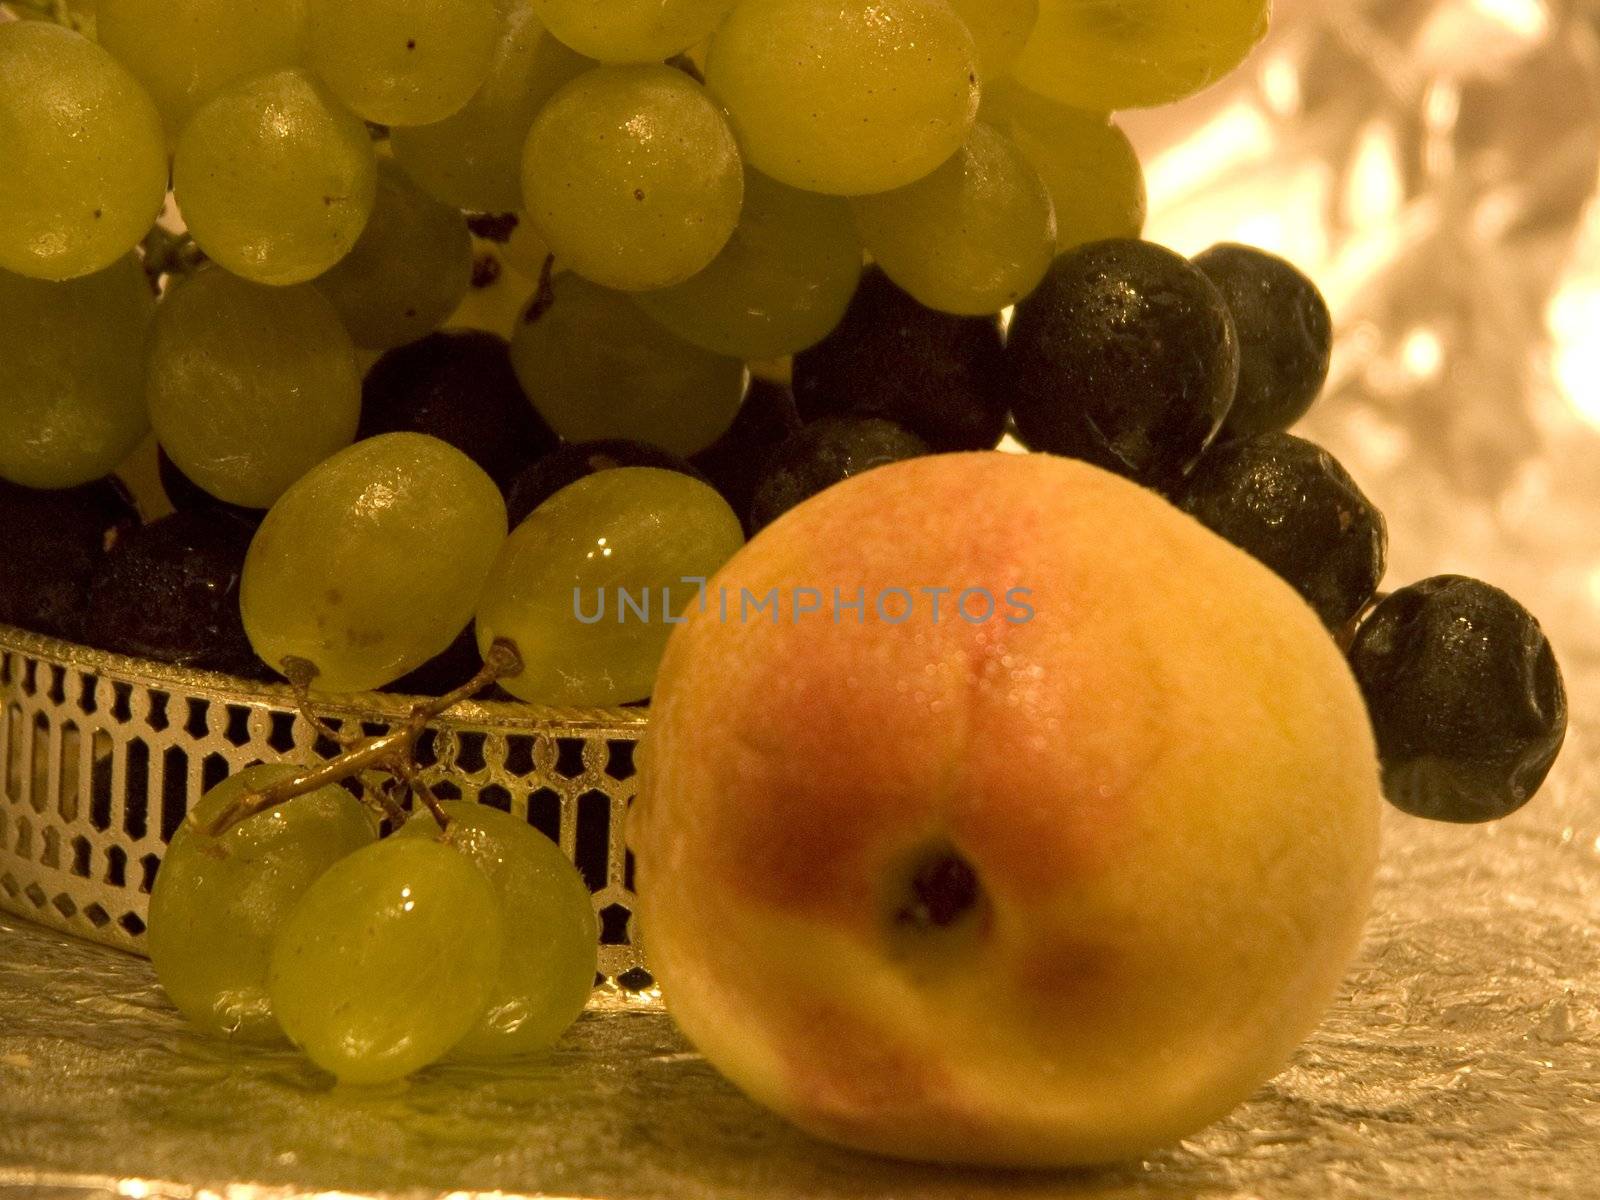 Grapes and peach by soloir